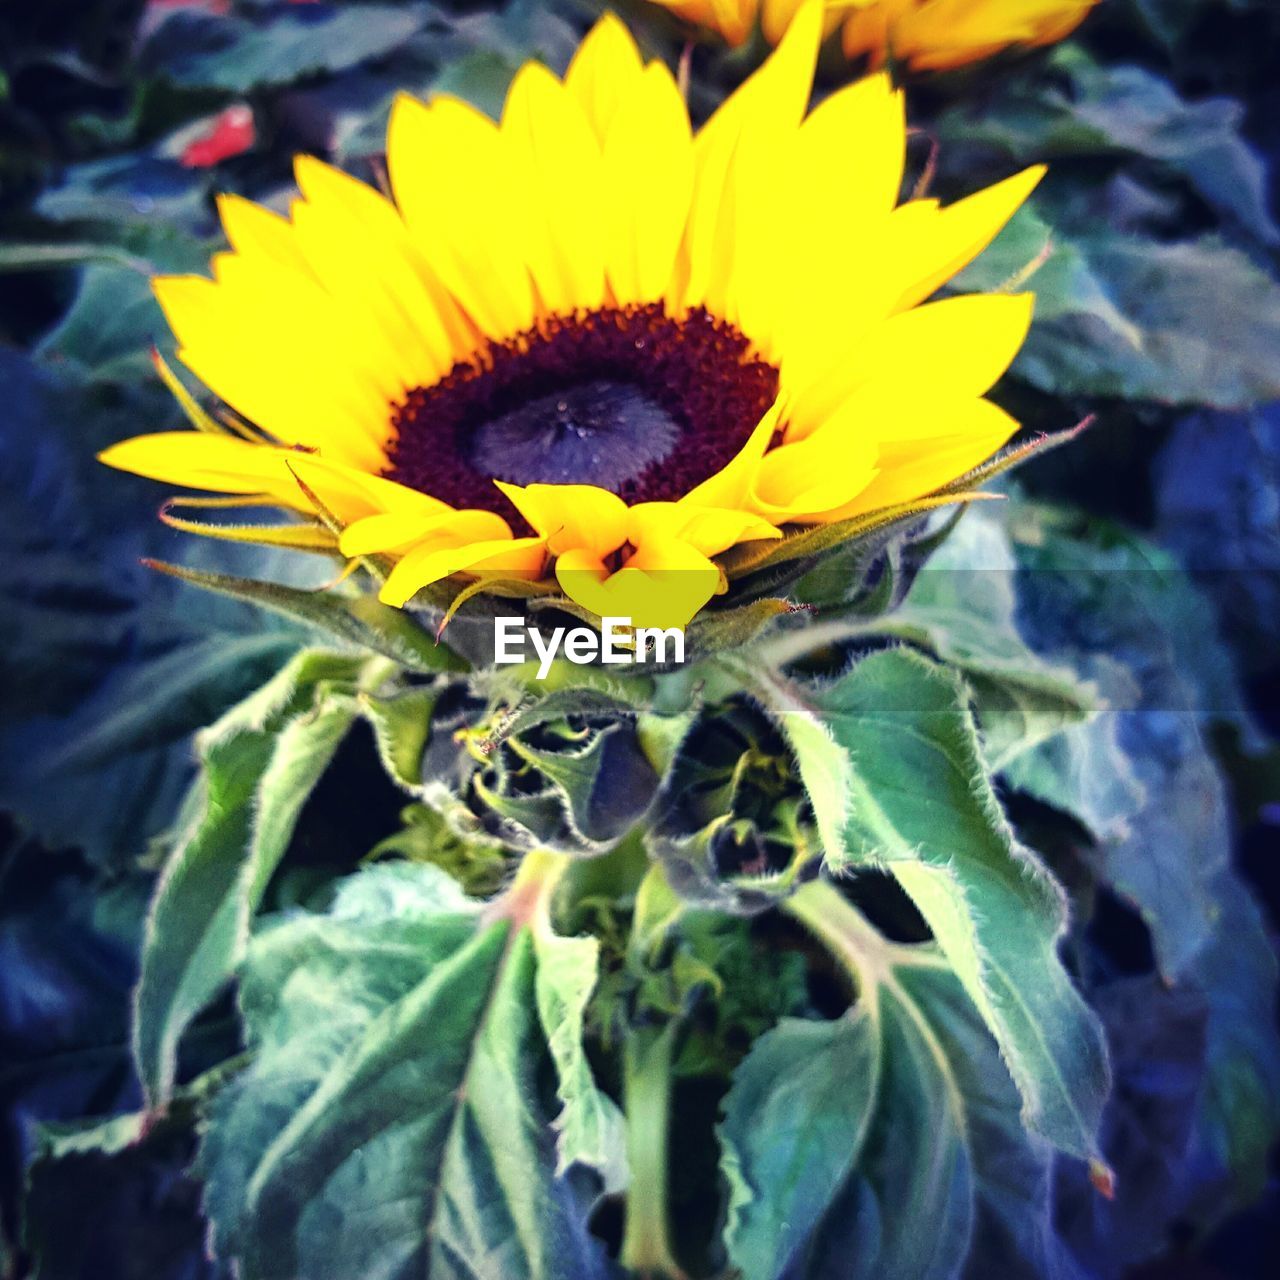 CLOSE-UP OF SUNFLOWERS BLOOMING OUTDOORS